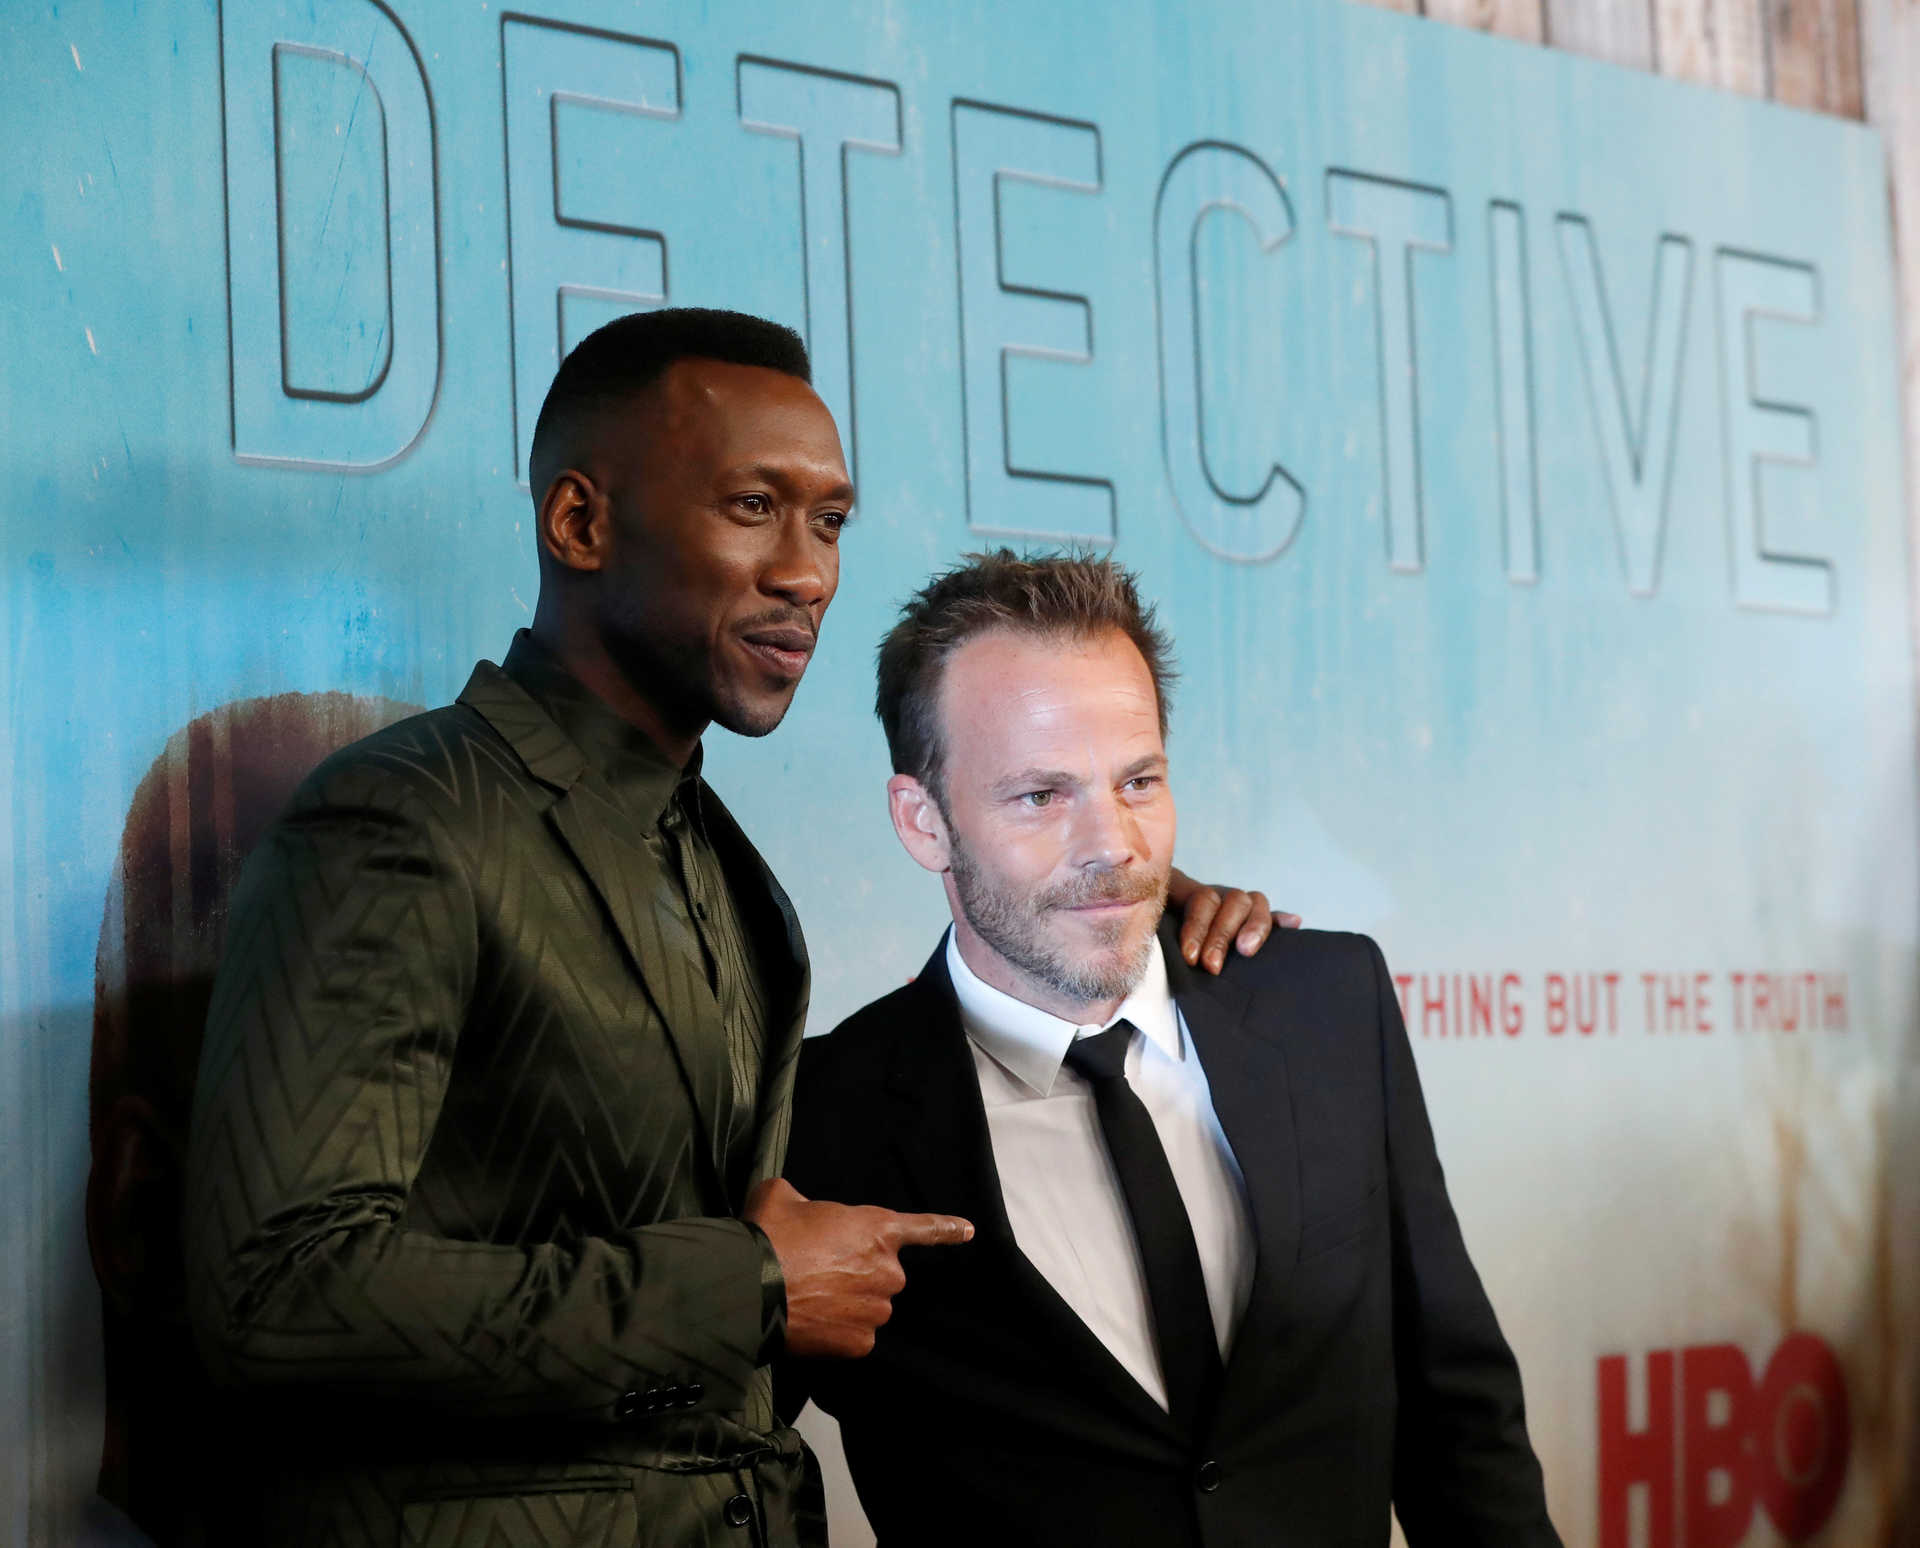 Cast members Ali and Dorff pose at the premiere for season 3 of the television series “True Detective” in Los Angeles